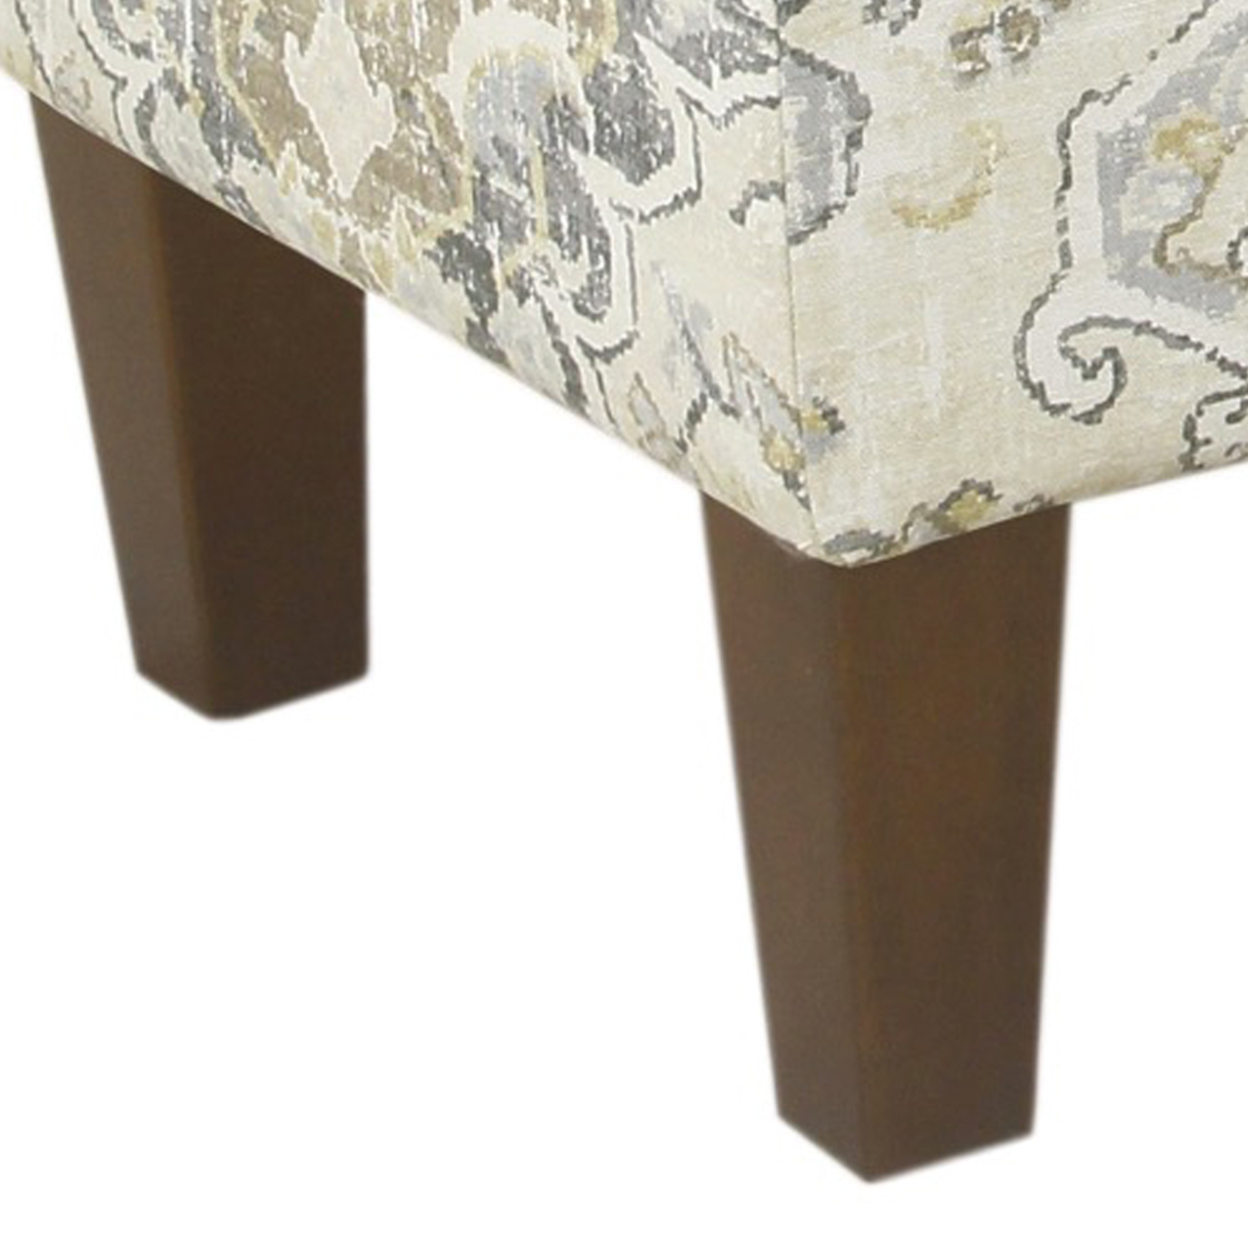 Medallion Print Fabric Upholstered Wooden Bench With Hinged Storage, Large, Brown And Cream- Saltoro Sherpi